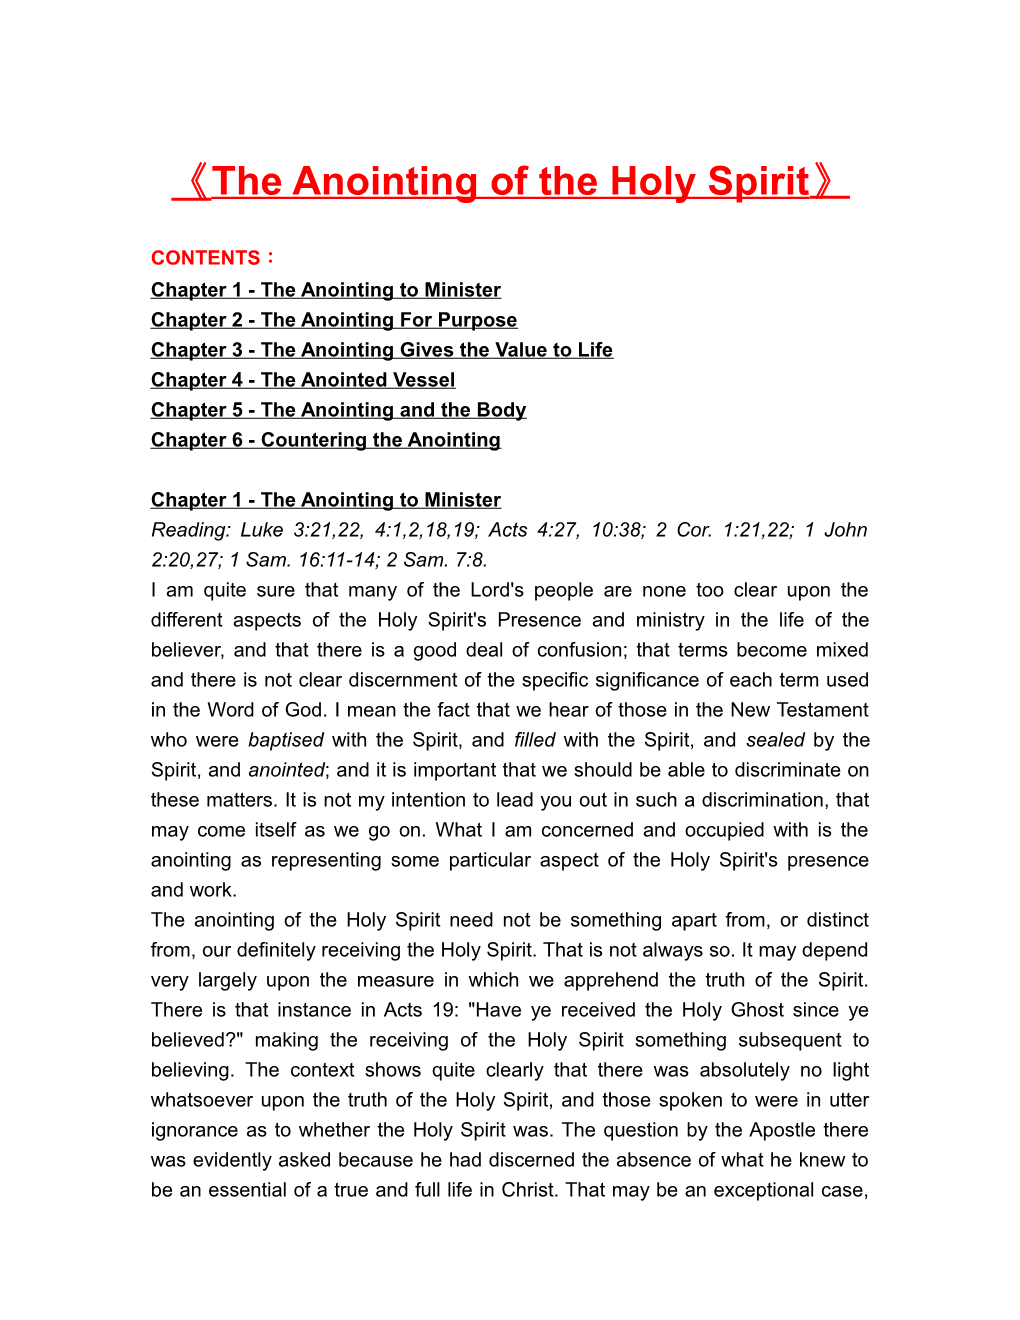 The Anointing of the Holy Spirit